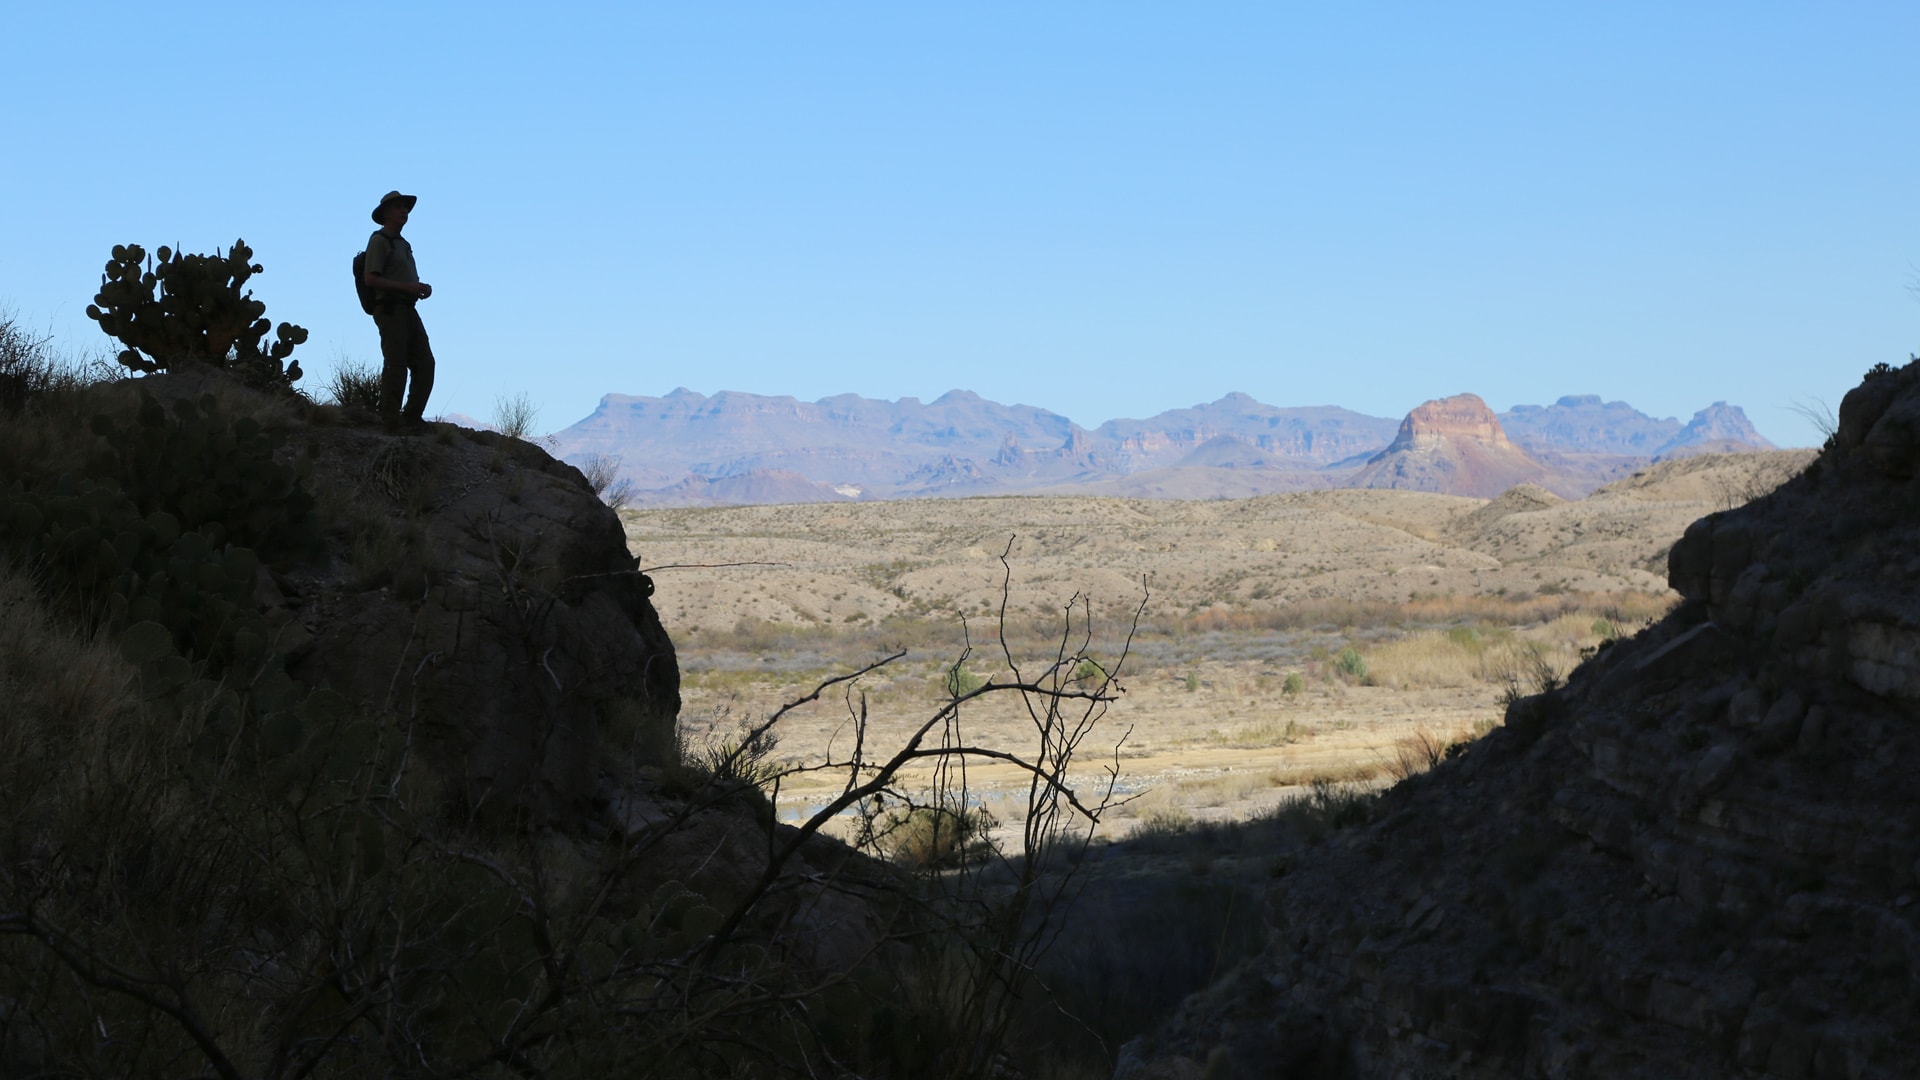 Road Trip to Big Bend National Park, Texas